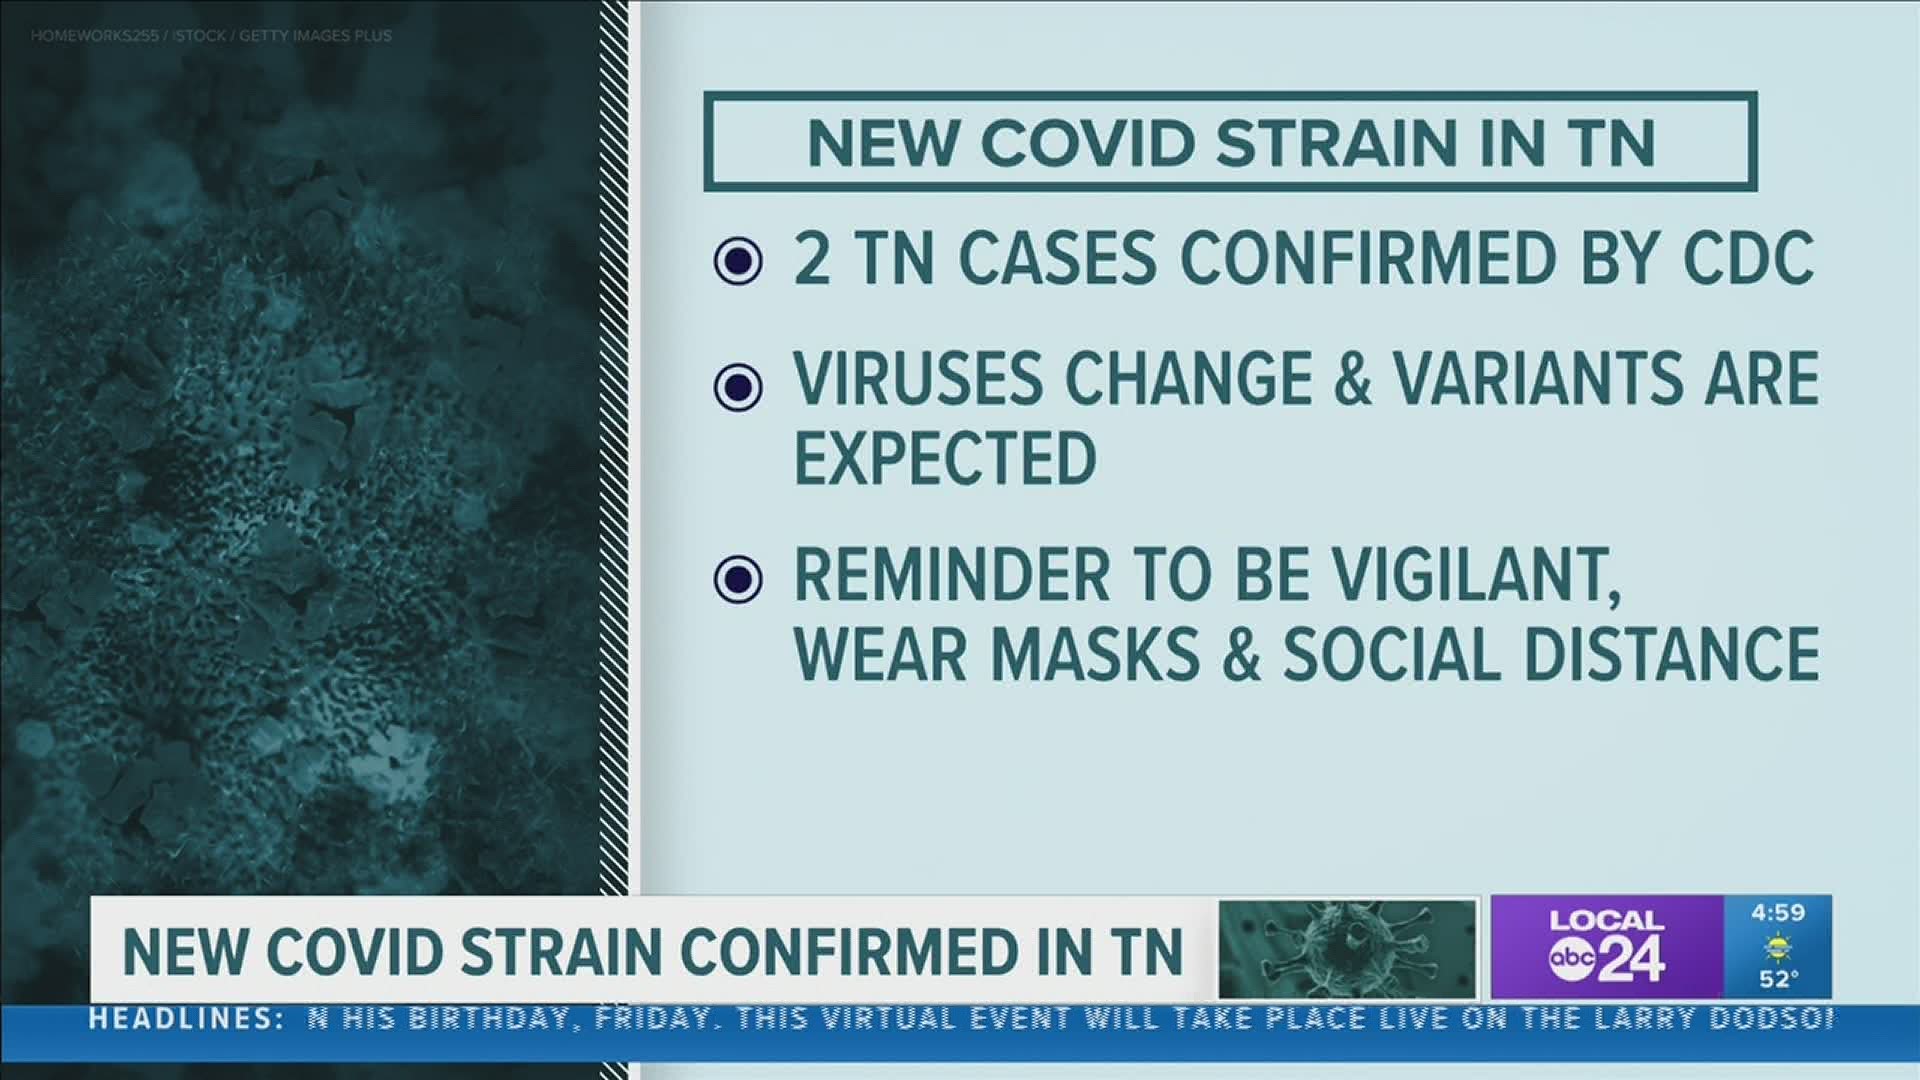 This does not change the state's response to COVID, but serves as a reminder to be vigilant.